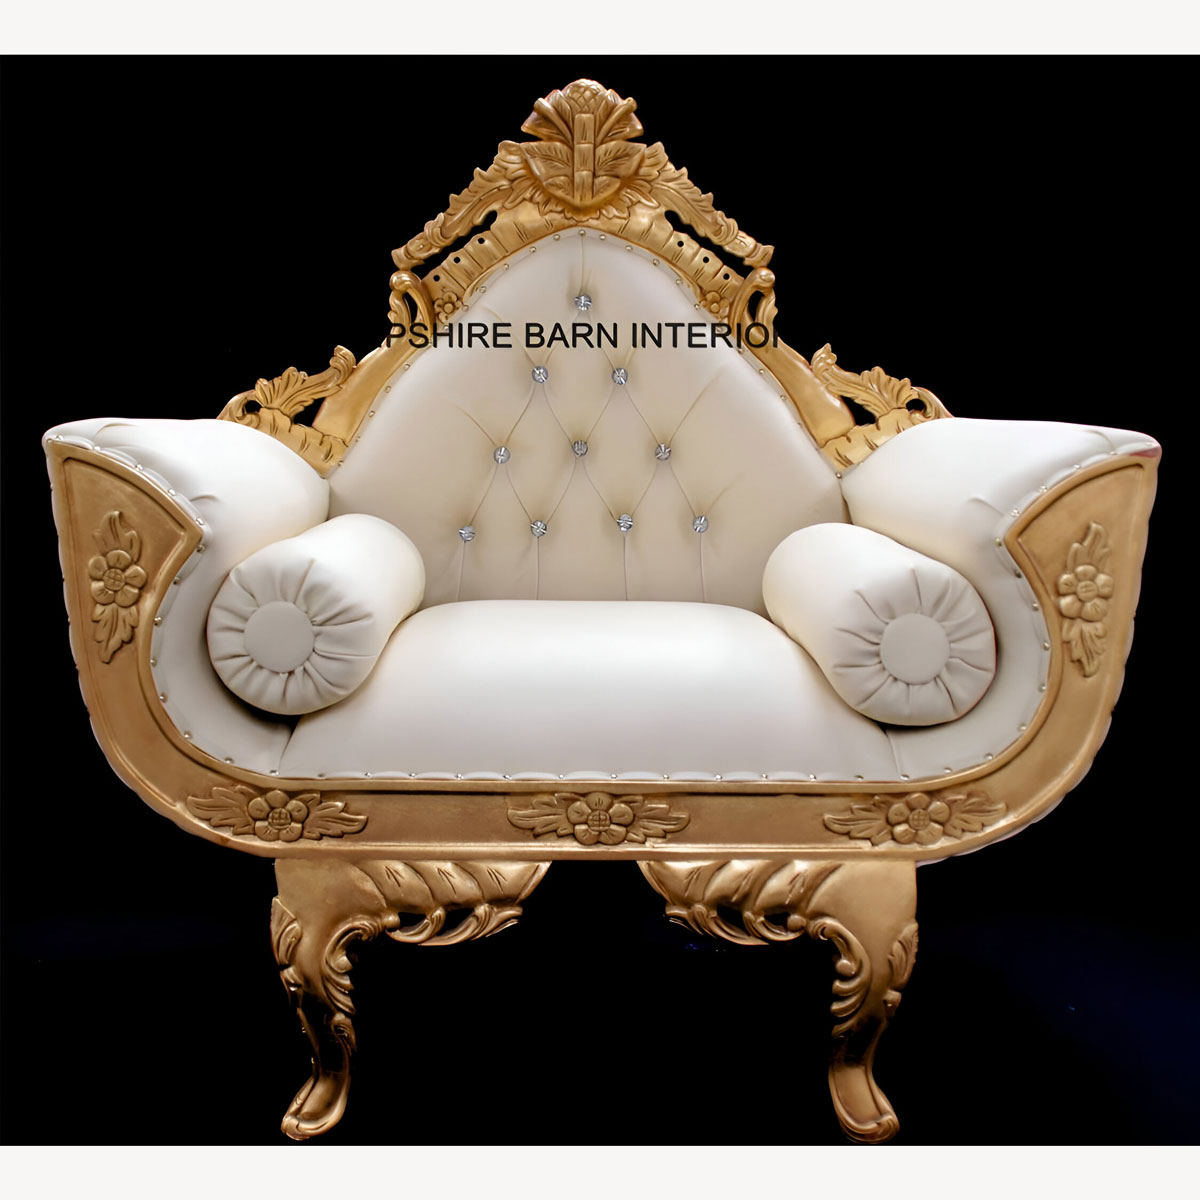 A Catherine Ornate Gold Royal Wedding 3 Piece Set Suite One Sofa And Two Chairs In Faux Cream Leather With Diamond Crystal Buttons 6 - Hampshire Barn Interiors - A Catherine Ornate Gold Royal Wedding 3 Piece Set / Suite (One Sofa And Two Chairs) In Faux Cream Leather With Diamond Crystal Buttons -